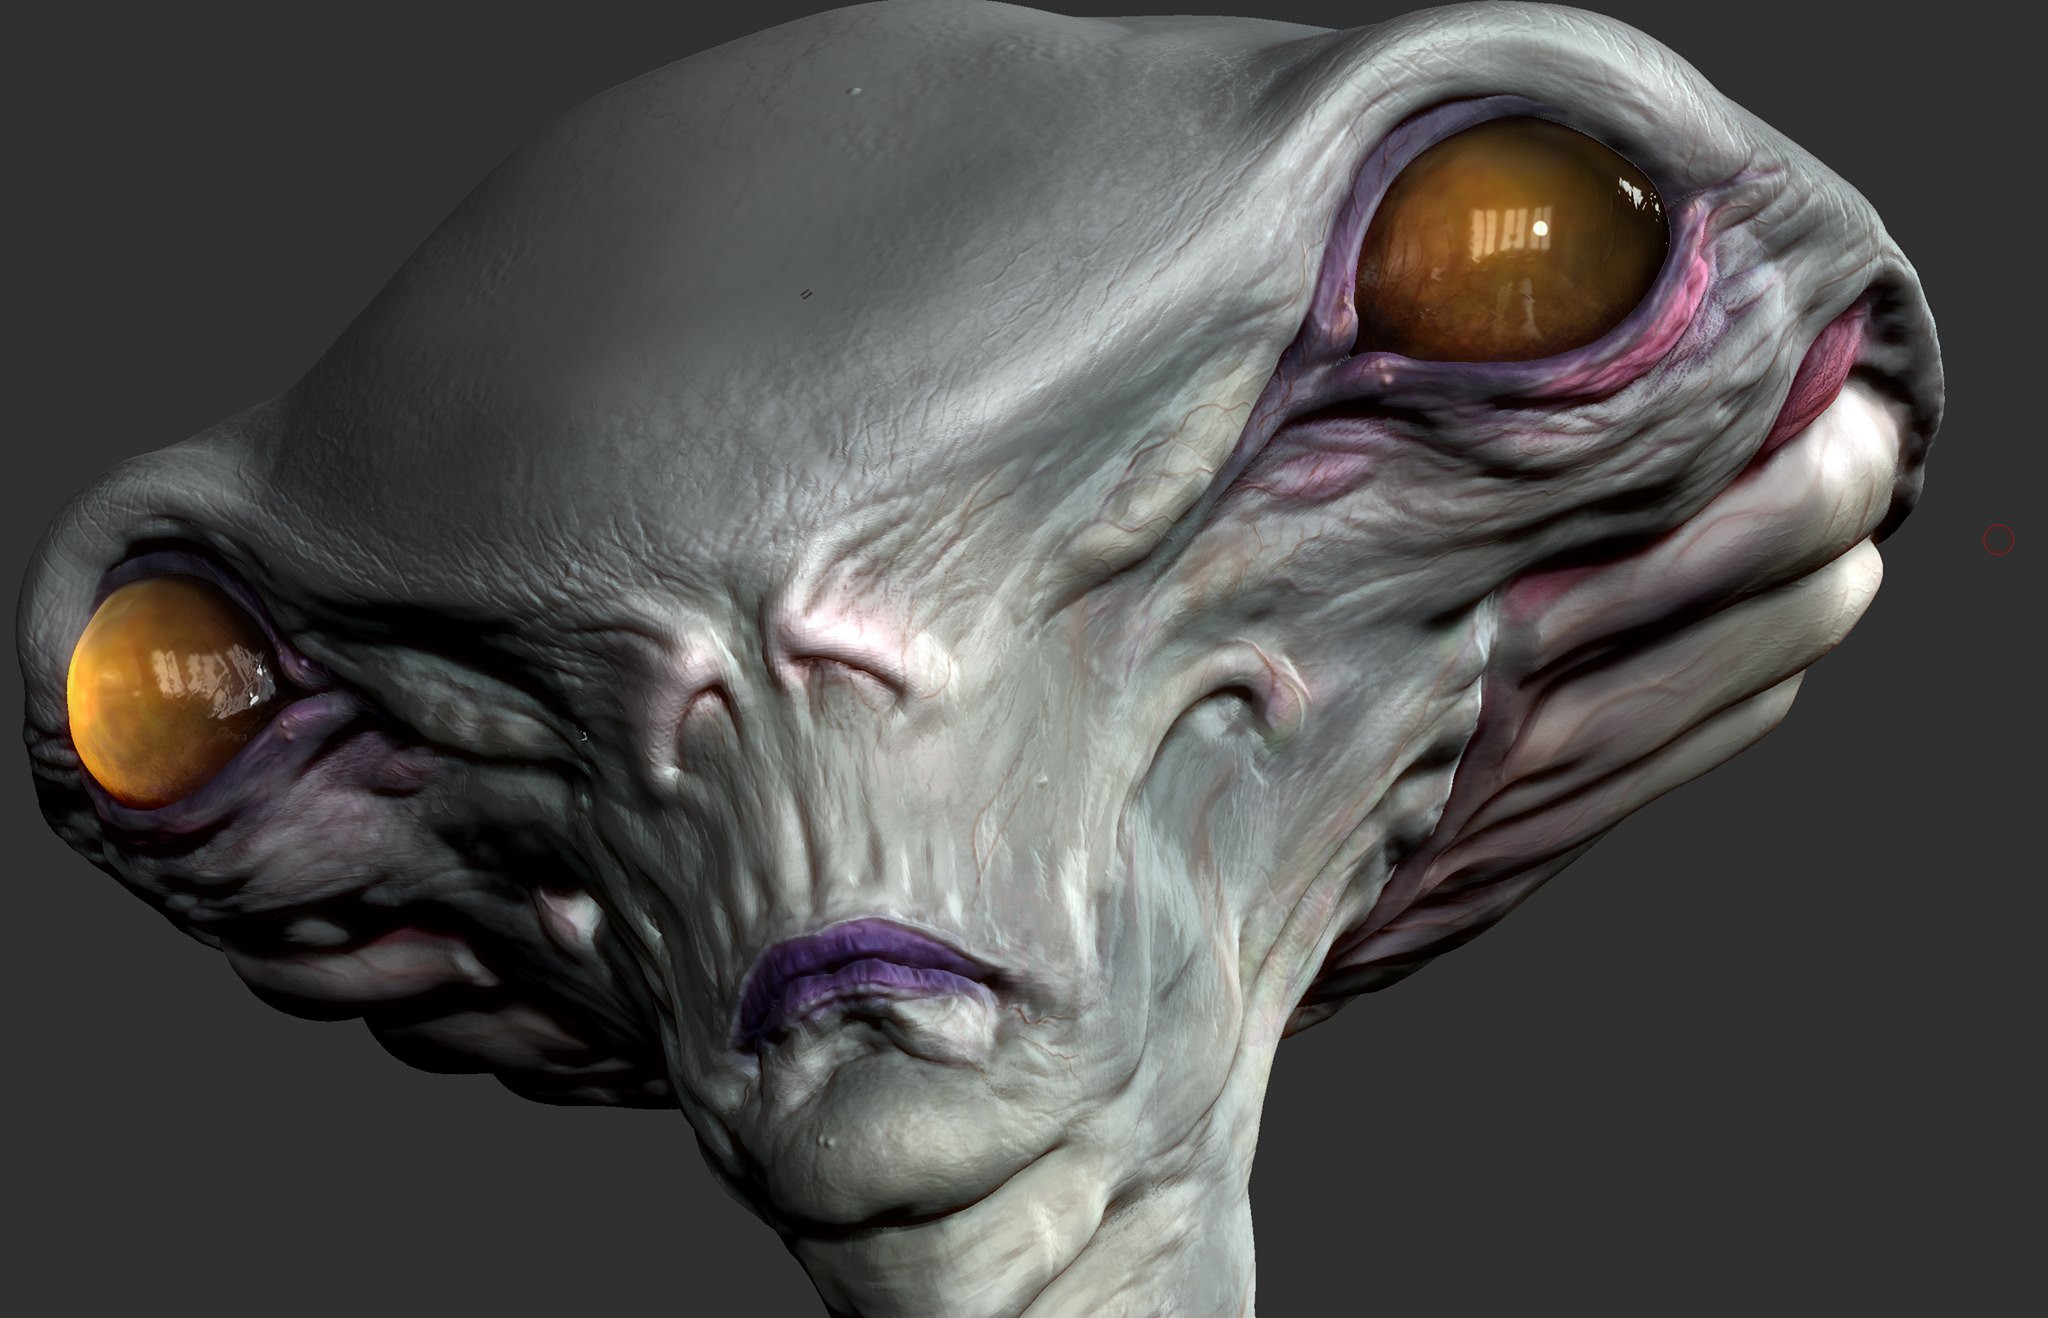 Crop of the Zbrush viewport from the tertiary stage. 